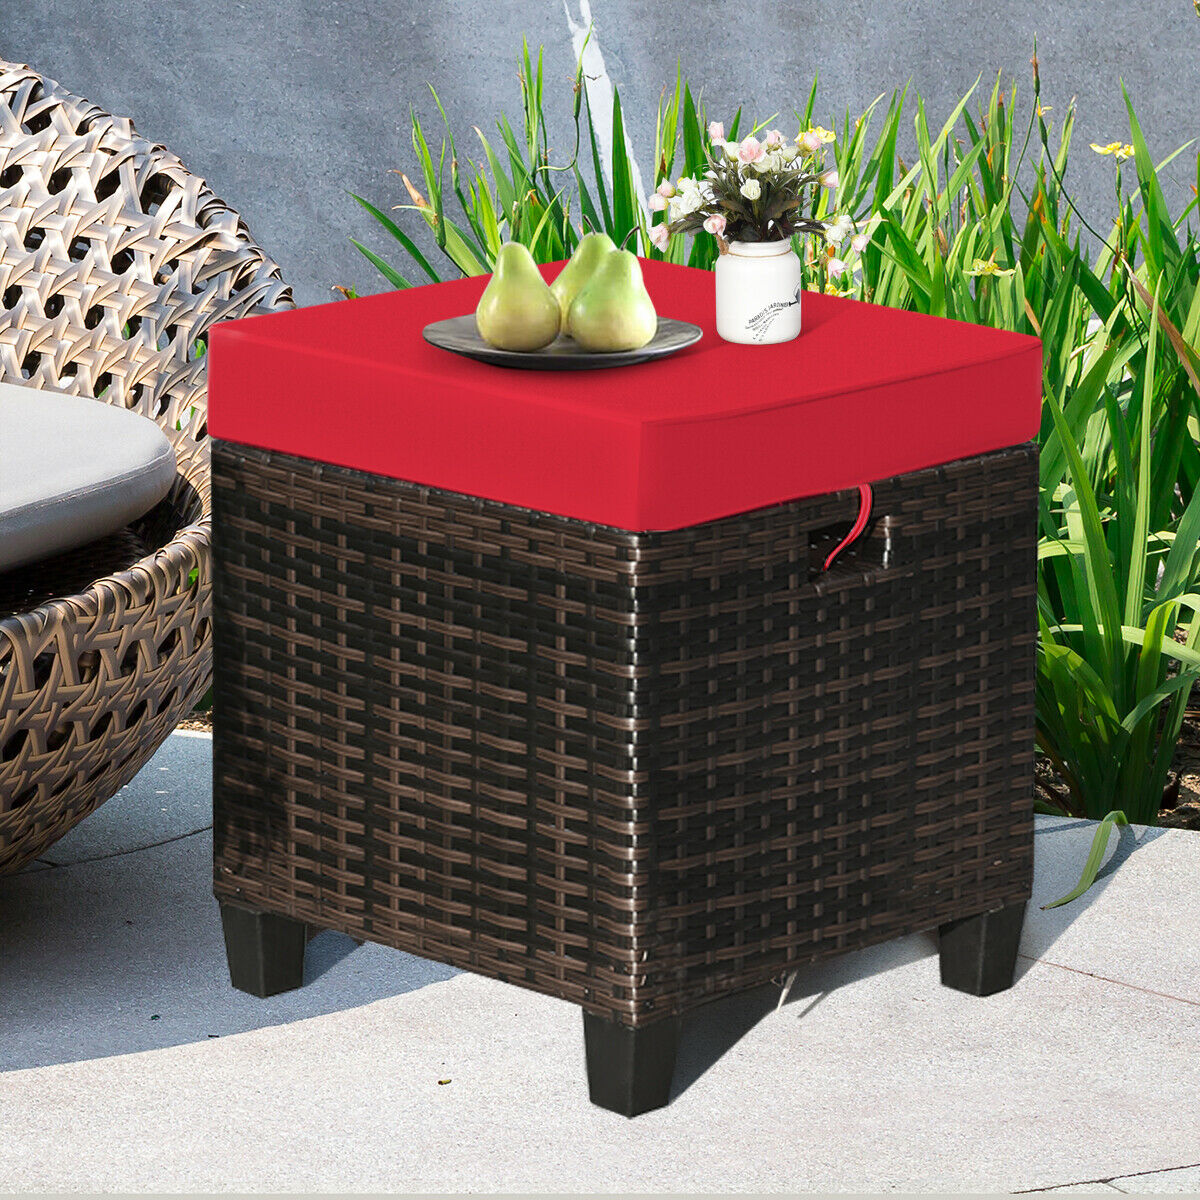 Set of 2 Outdoor Rattan Ottoman Chair Seat with Padded Cushions-Red